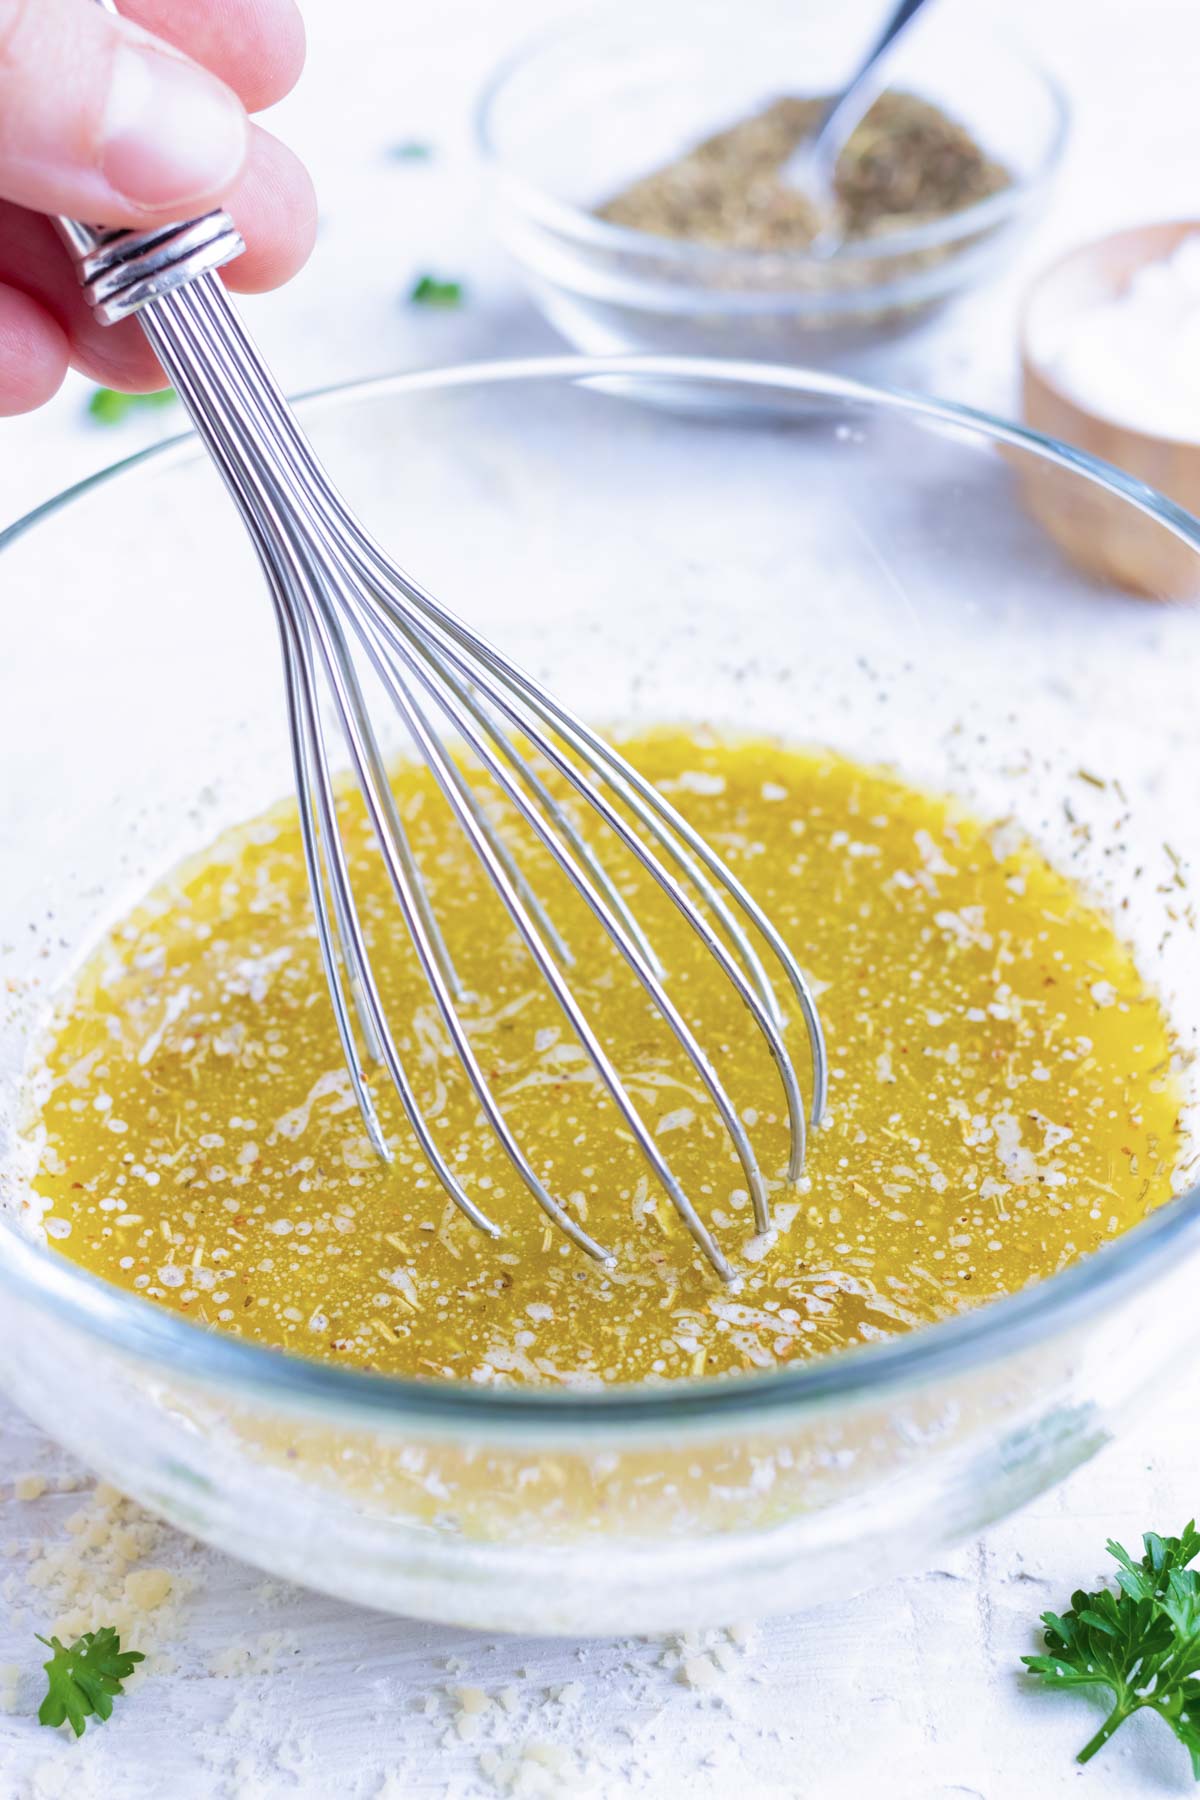 A glass bowl with homemade Italian dressing being whisked together.